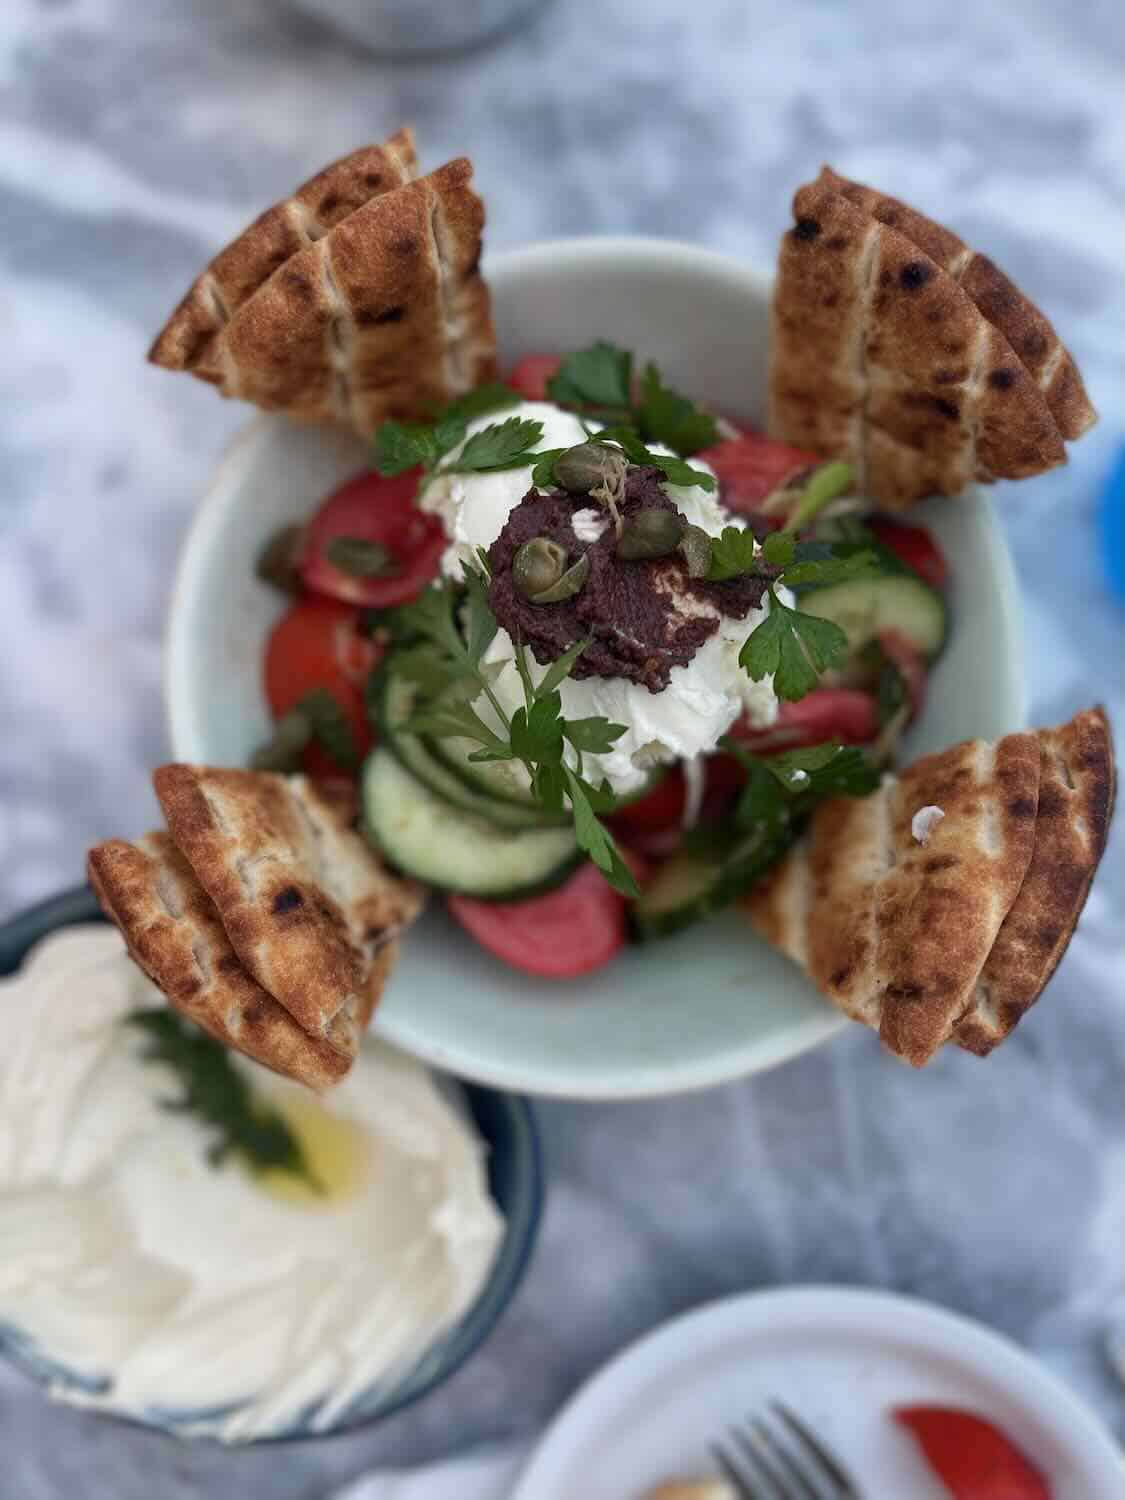 A traditional Greek salad topped with olives and feta cheese, served alongside creamy tzatziki and grilled pita bread.